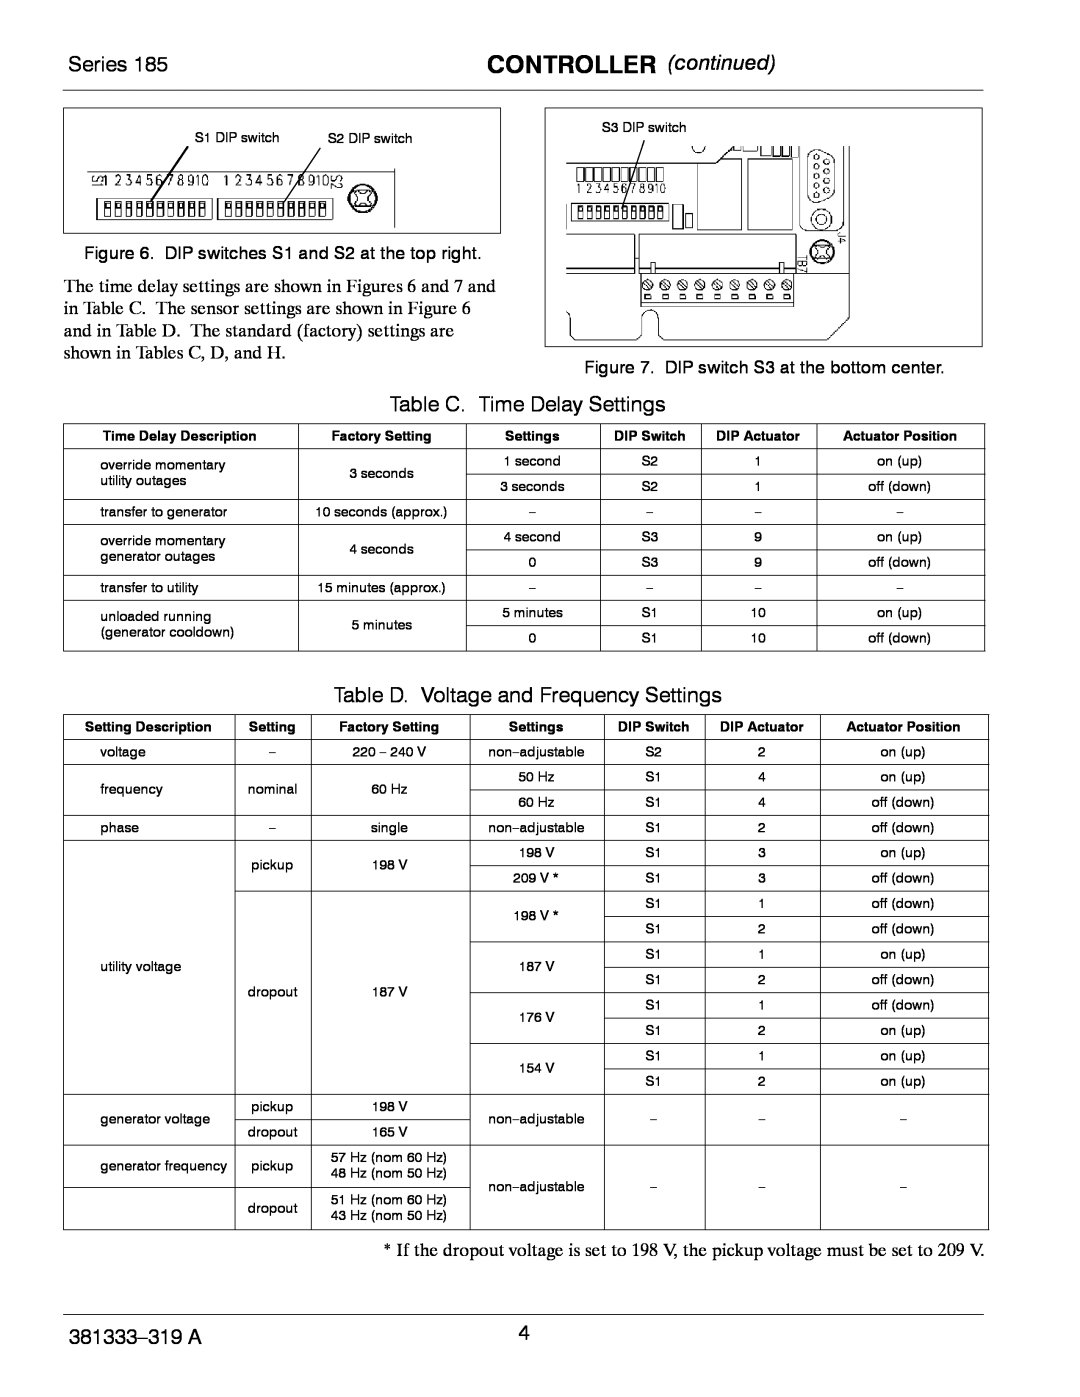 Emerson 185 manual CONTROLLER continued, Table C. Time Delay Settings, Table D. Voltage and Frequency Settings, Series 